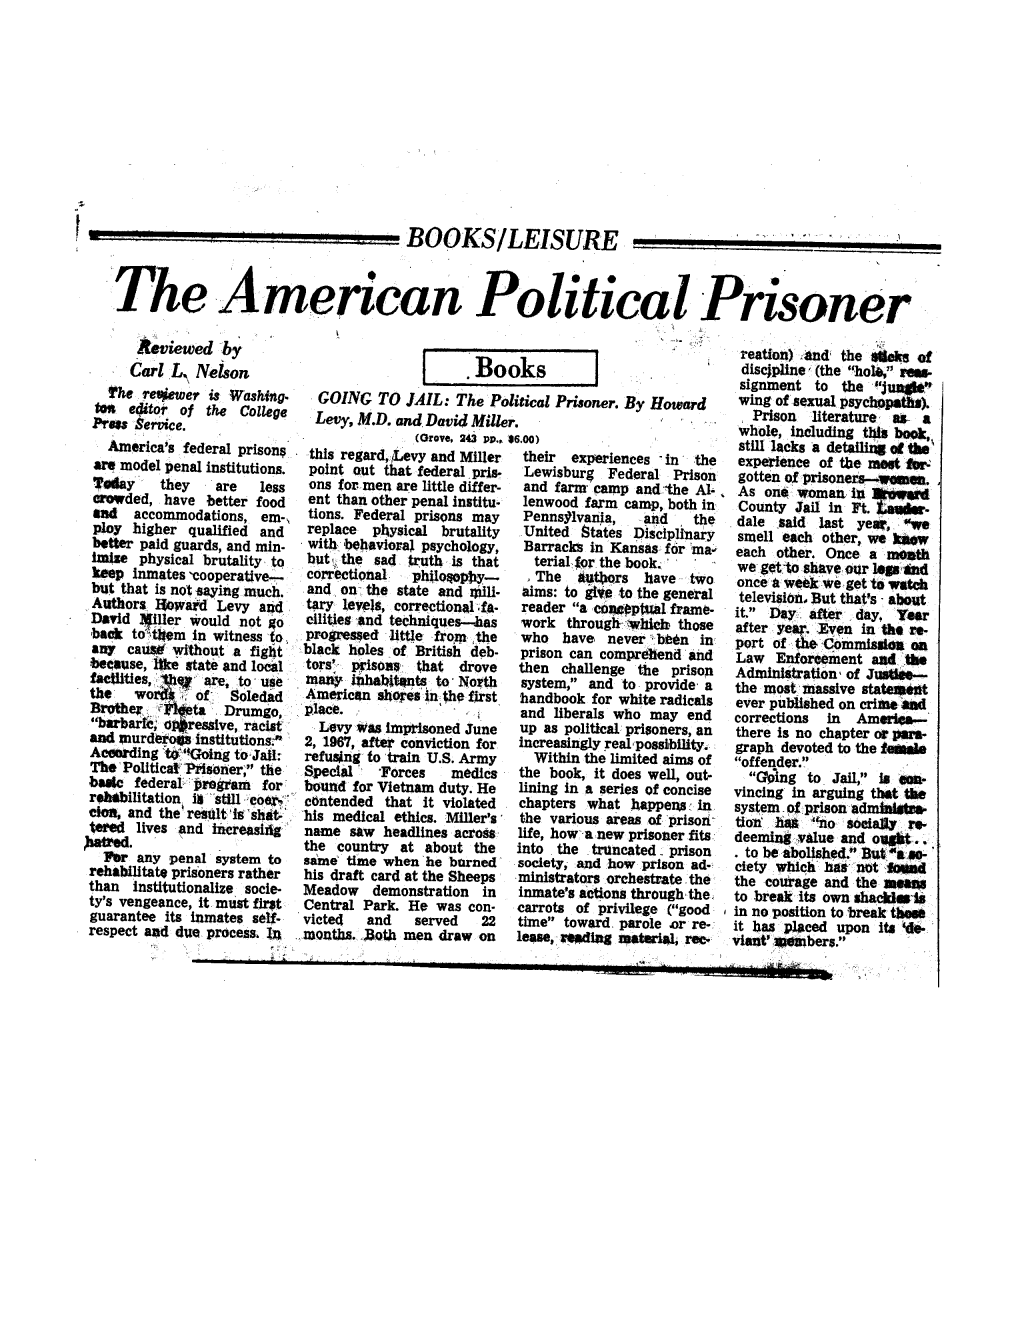 The American Political Prisoner Reviewed by Reation) .And the Tasks of Carl L.\ Nelson